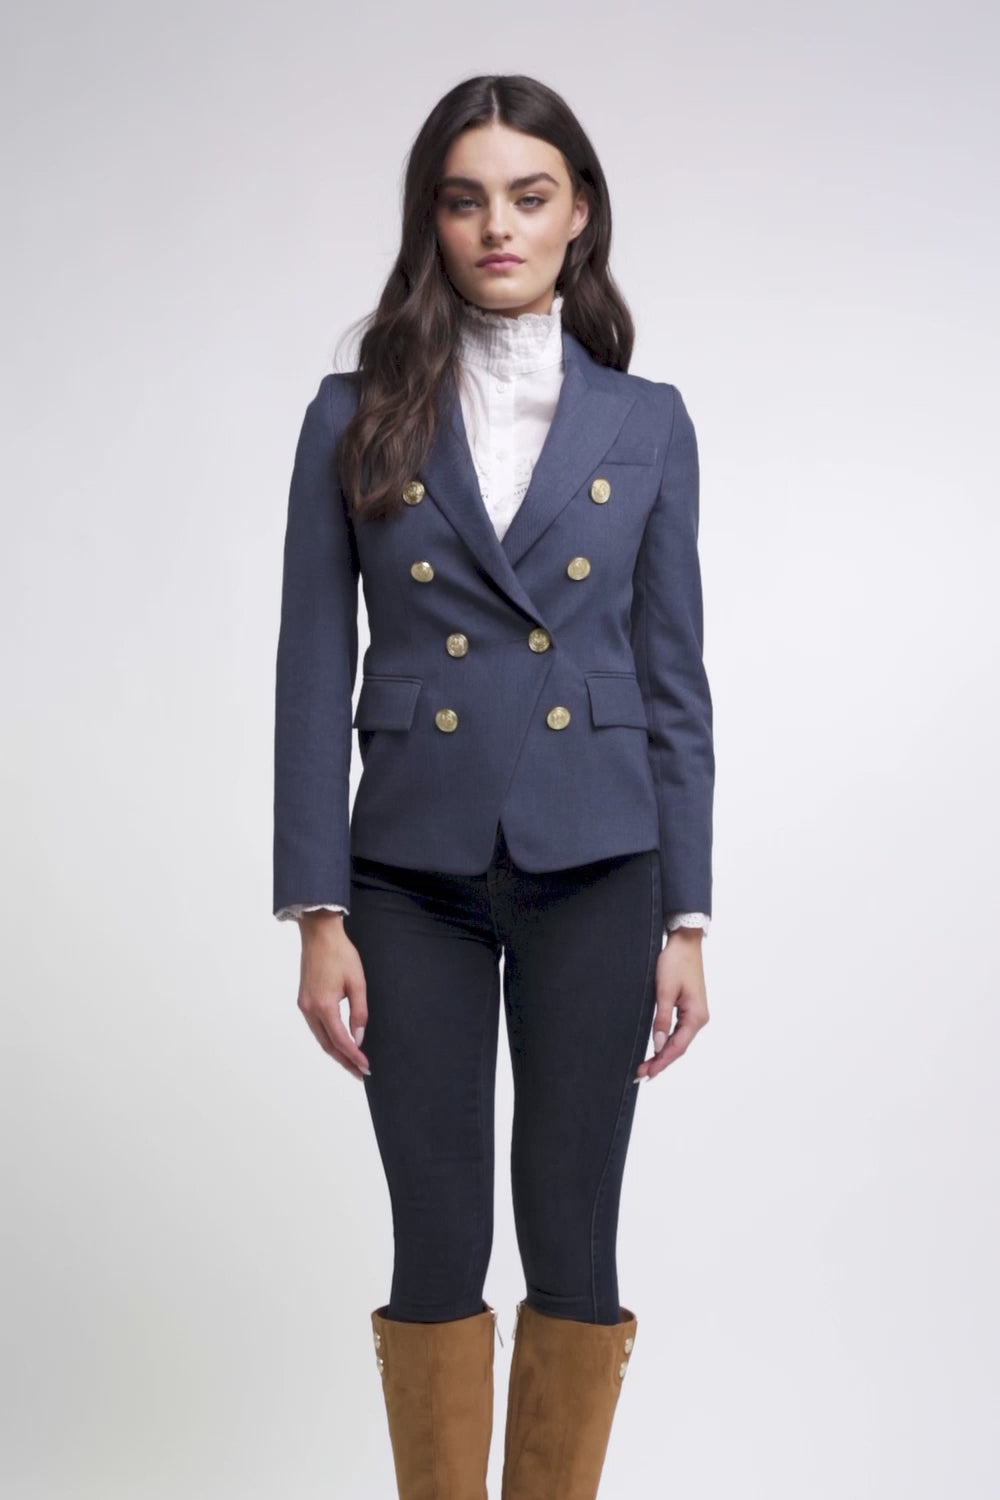 British made double breasted blazer that fastens with a single button hole to create a more form fitting silhouette with two pockets and gold button detailing this blazer in denim